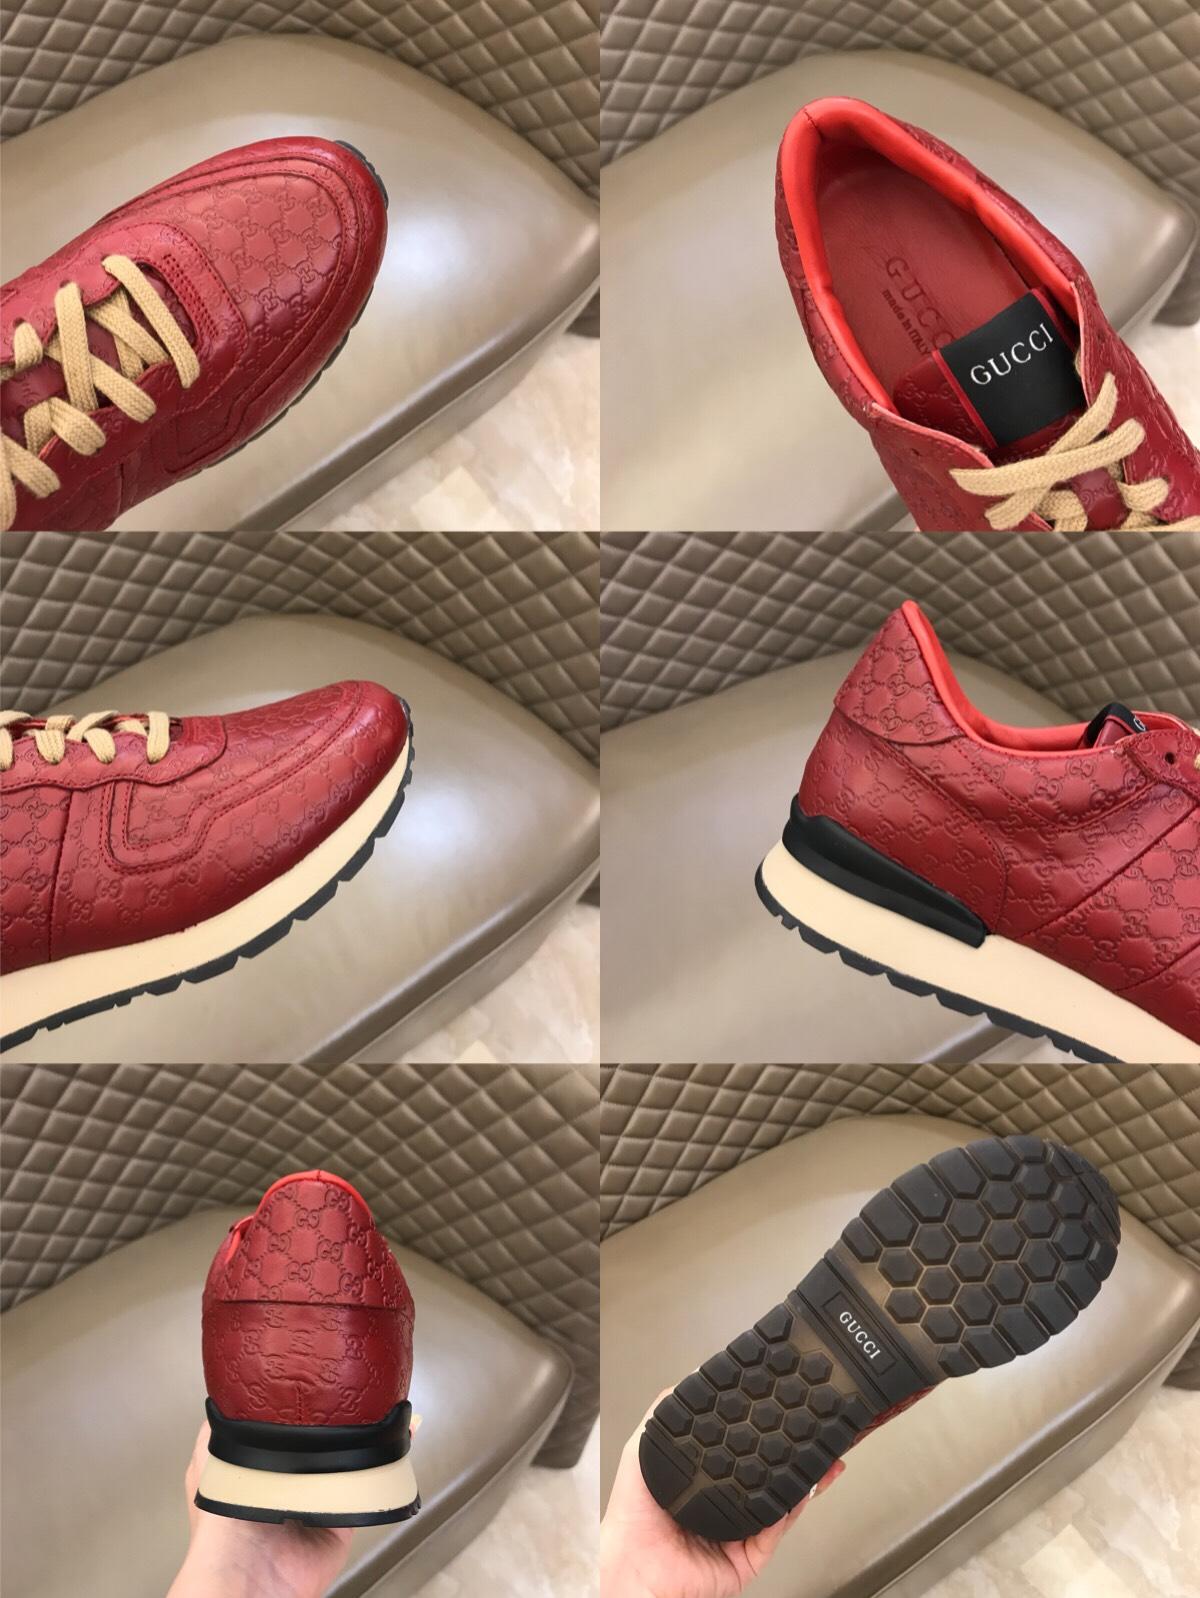 Gucci Perfect Quality Sneakers Red and GG engraving with white sole MS02722